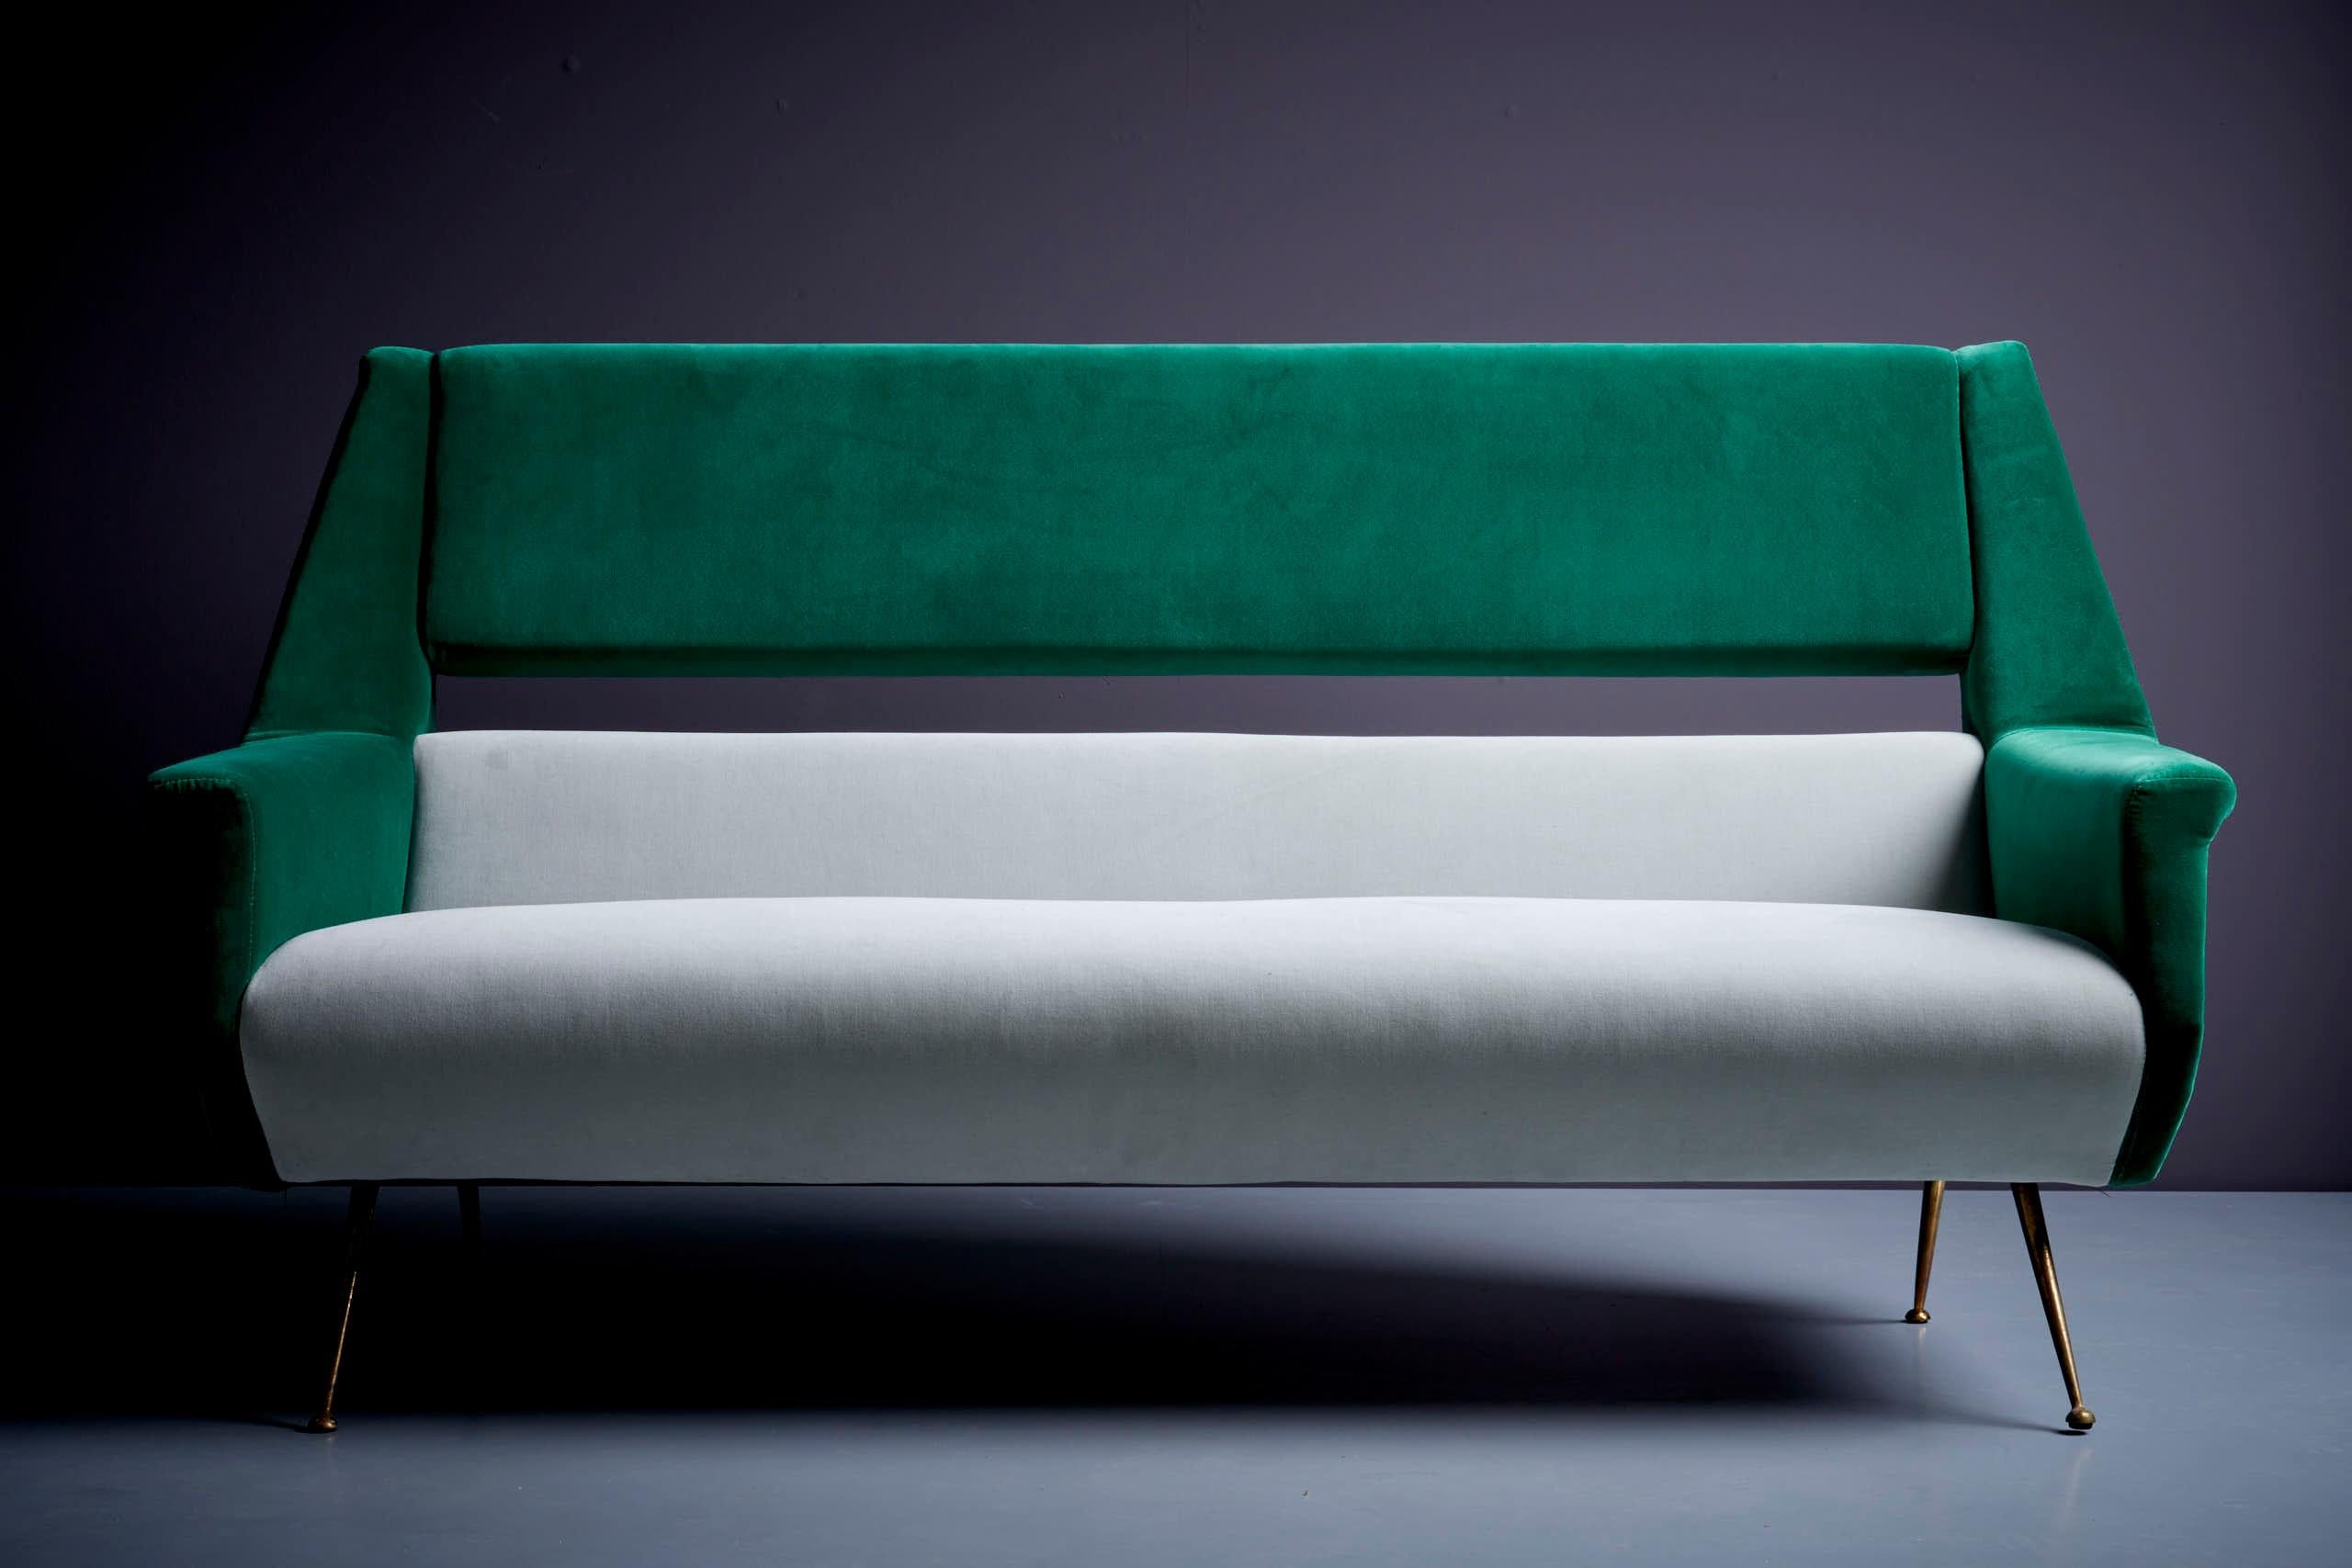 Mid-20th Century Newly Upholstered Gigi Radice Sofa in Green and Grey for Minotti, Italy, 1950s For Sale